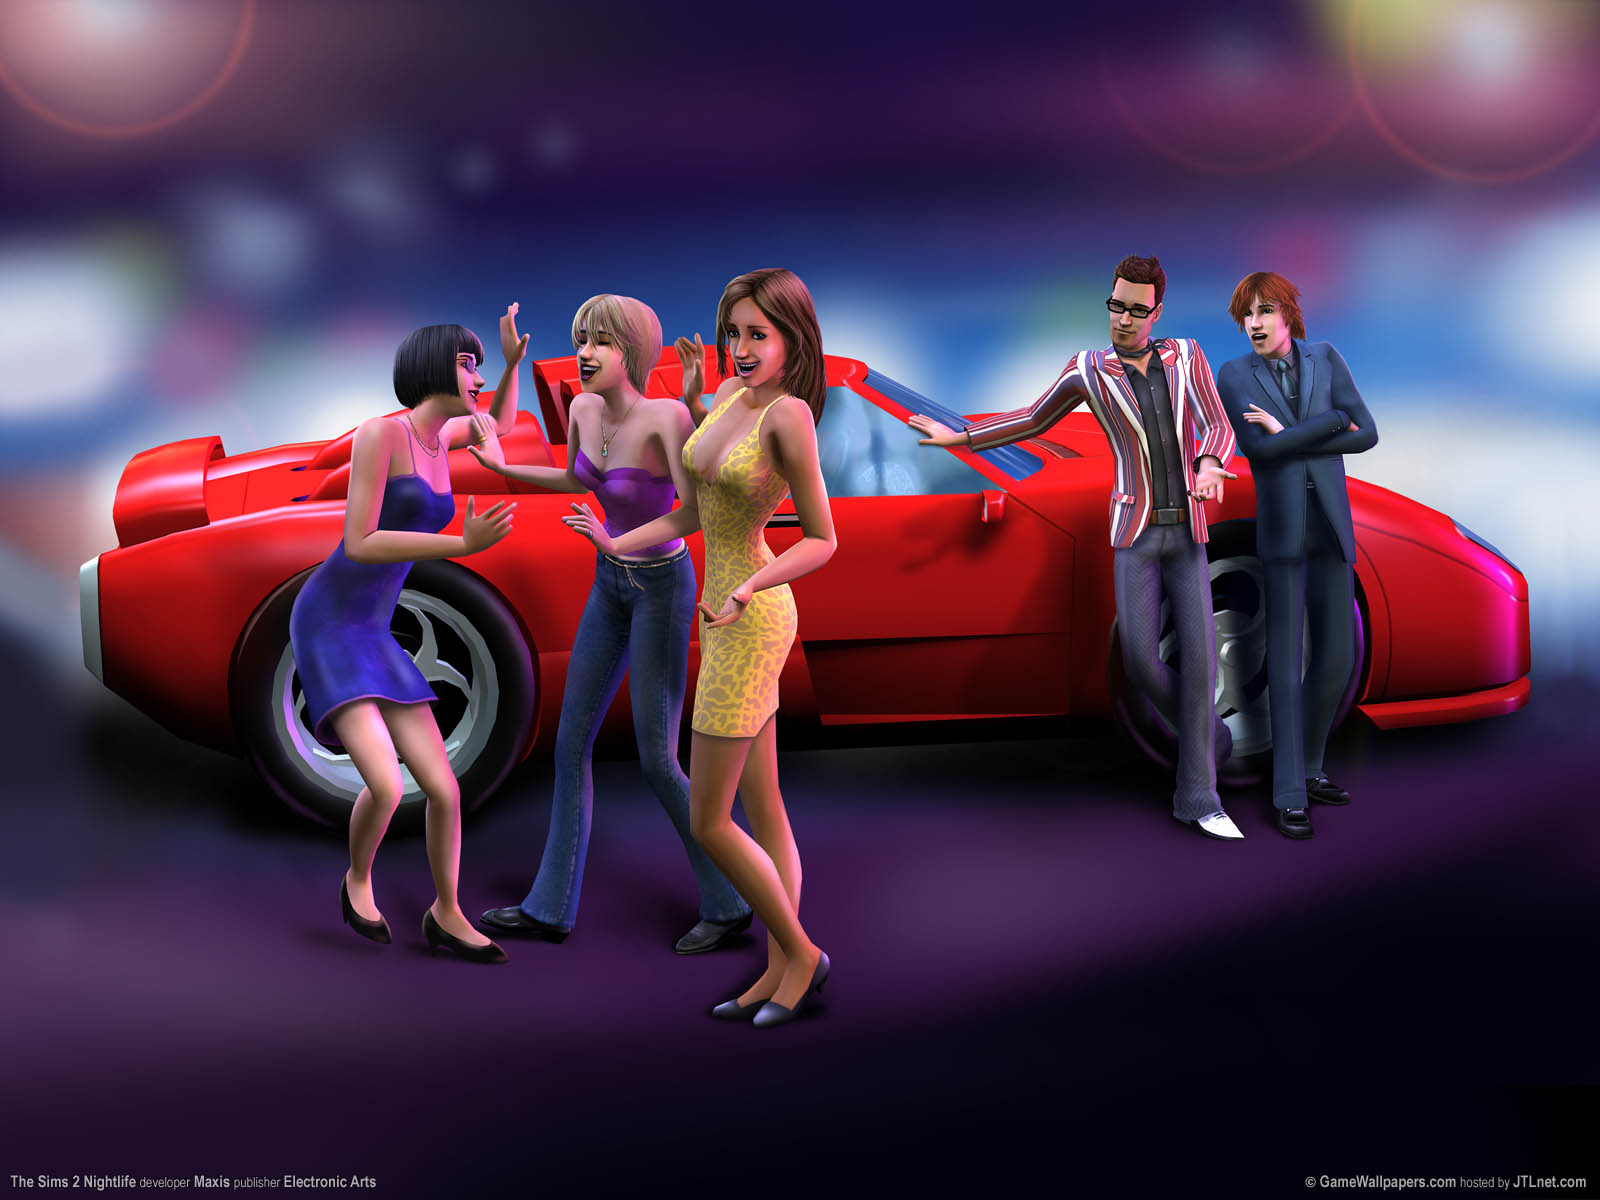 The Sims 2 Nightlife wallpaper 04 1600x1200